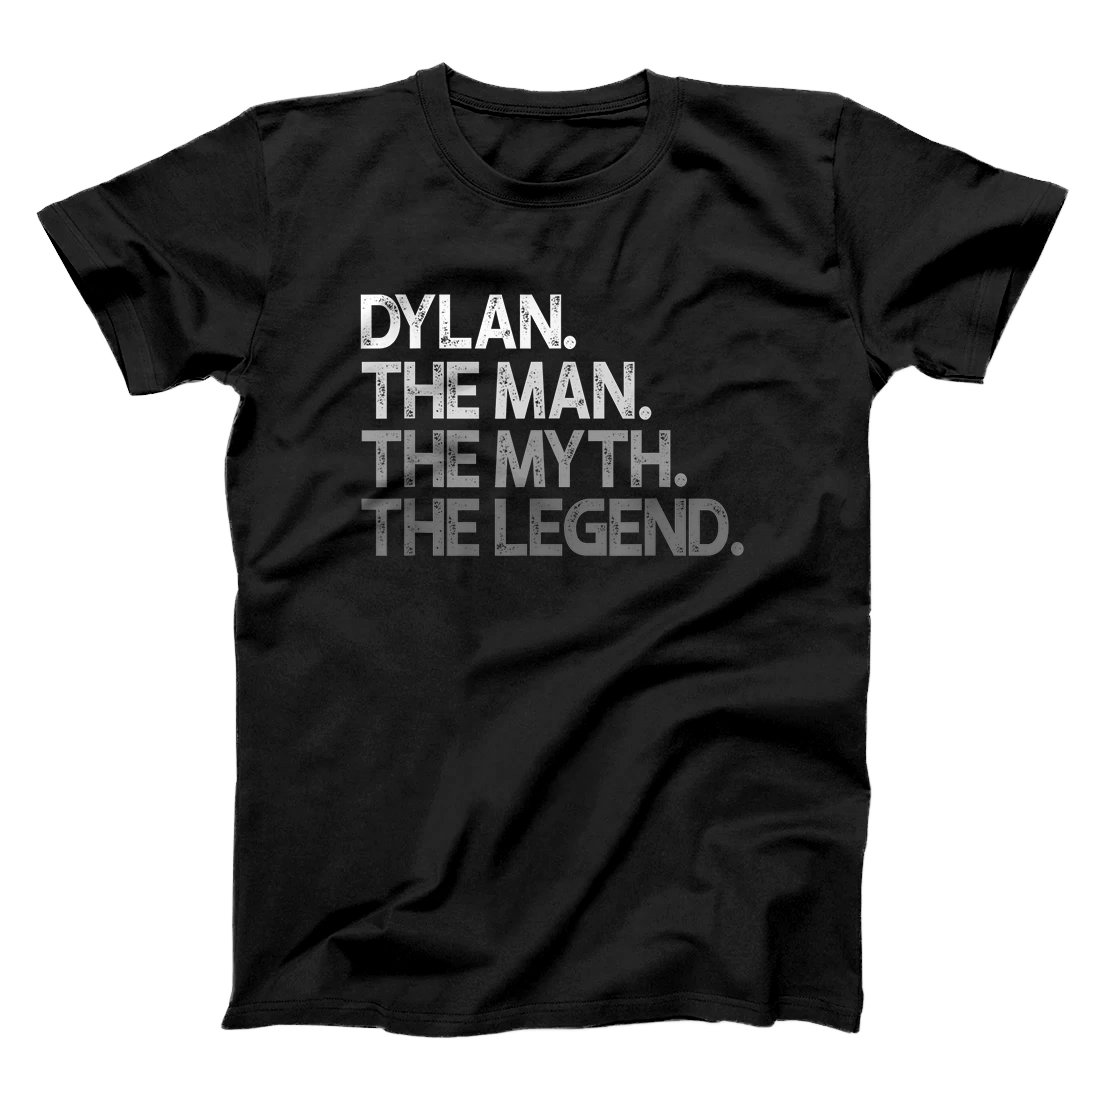 Personalized Dylan Gift: The Man Myth Legend T-Shirt